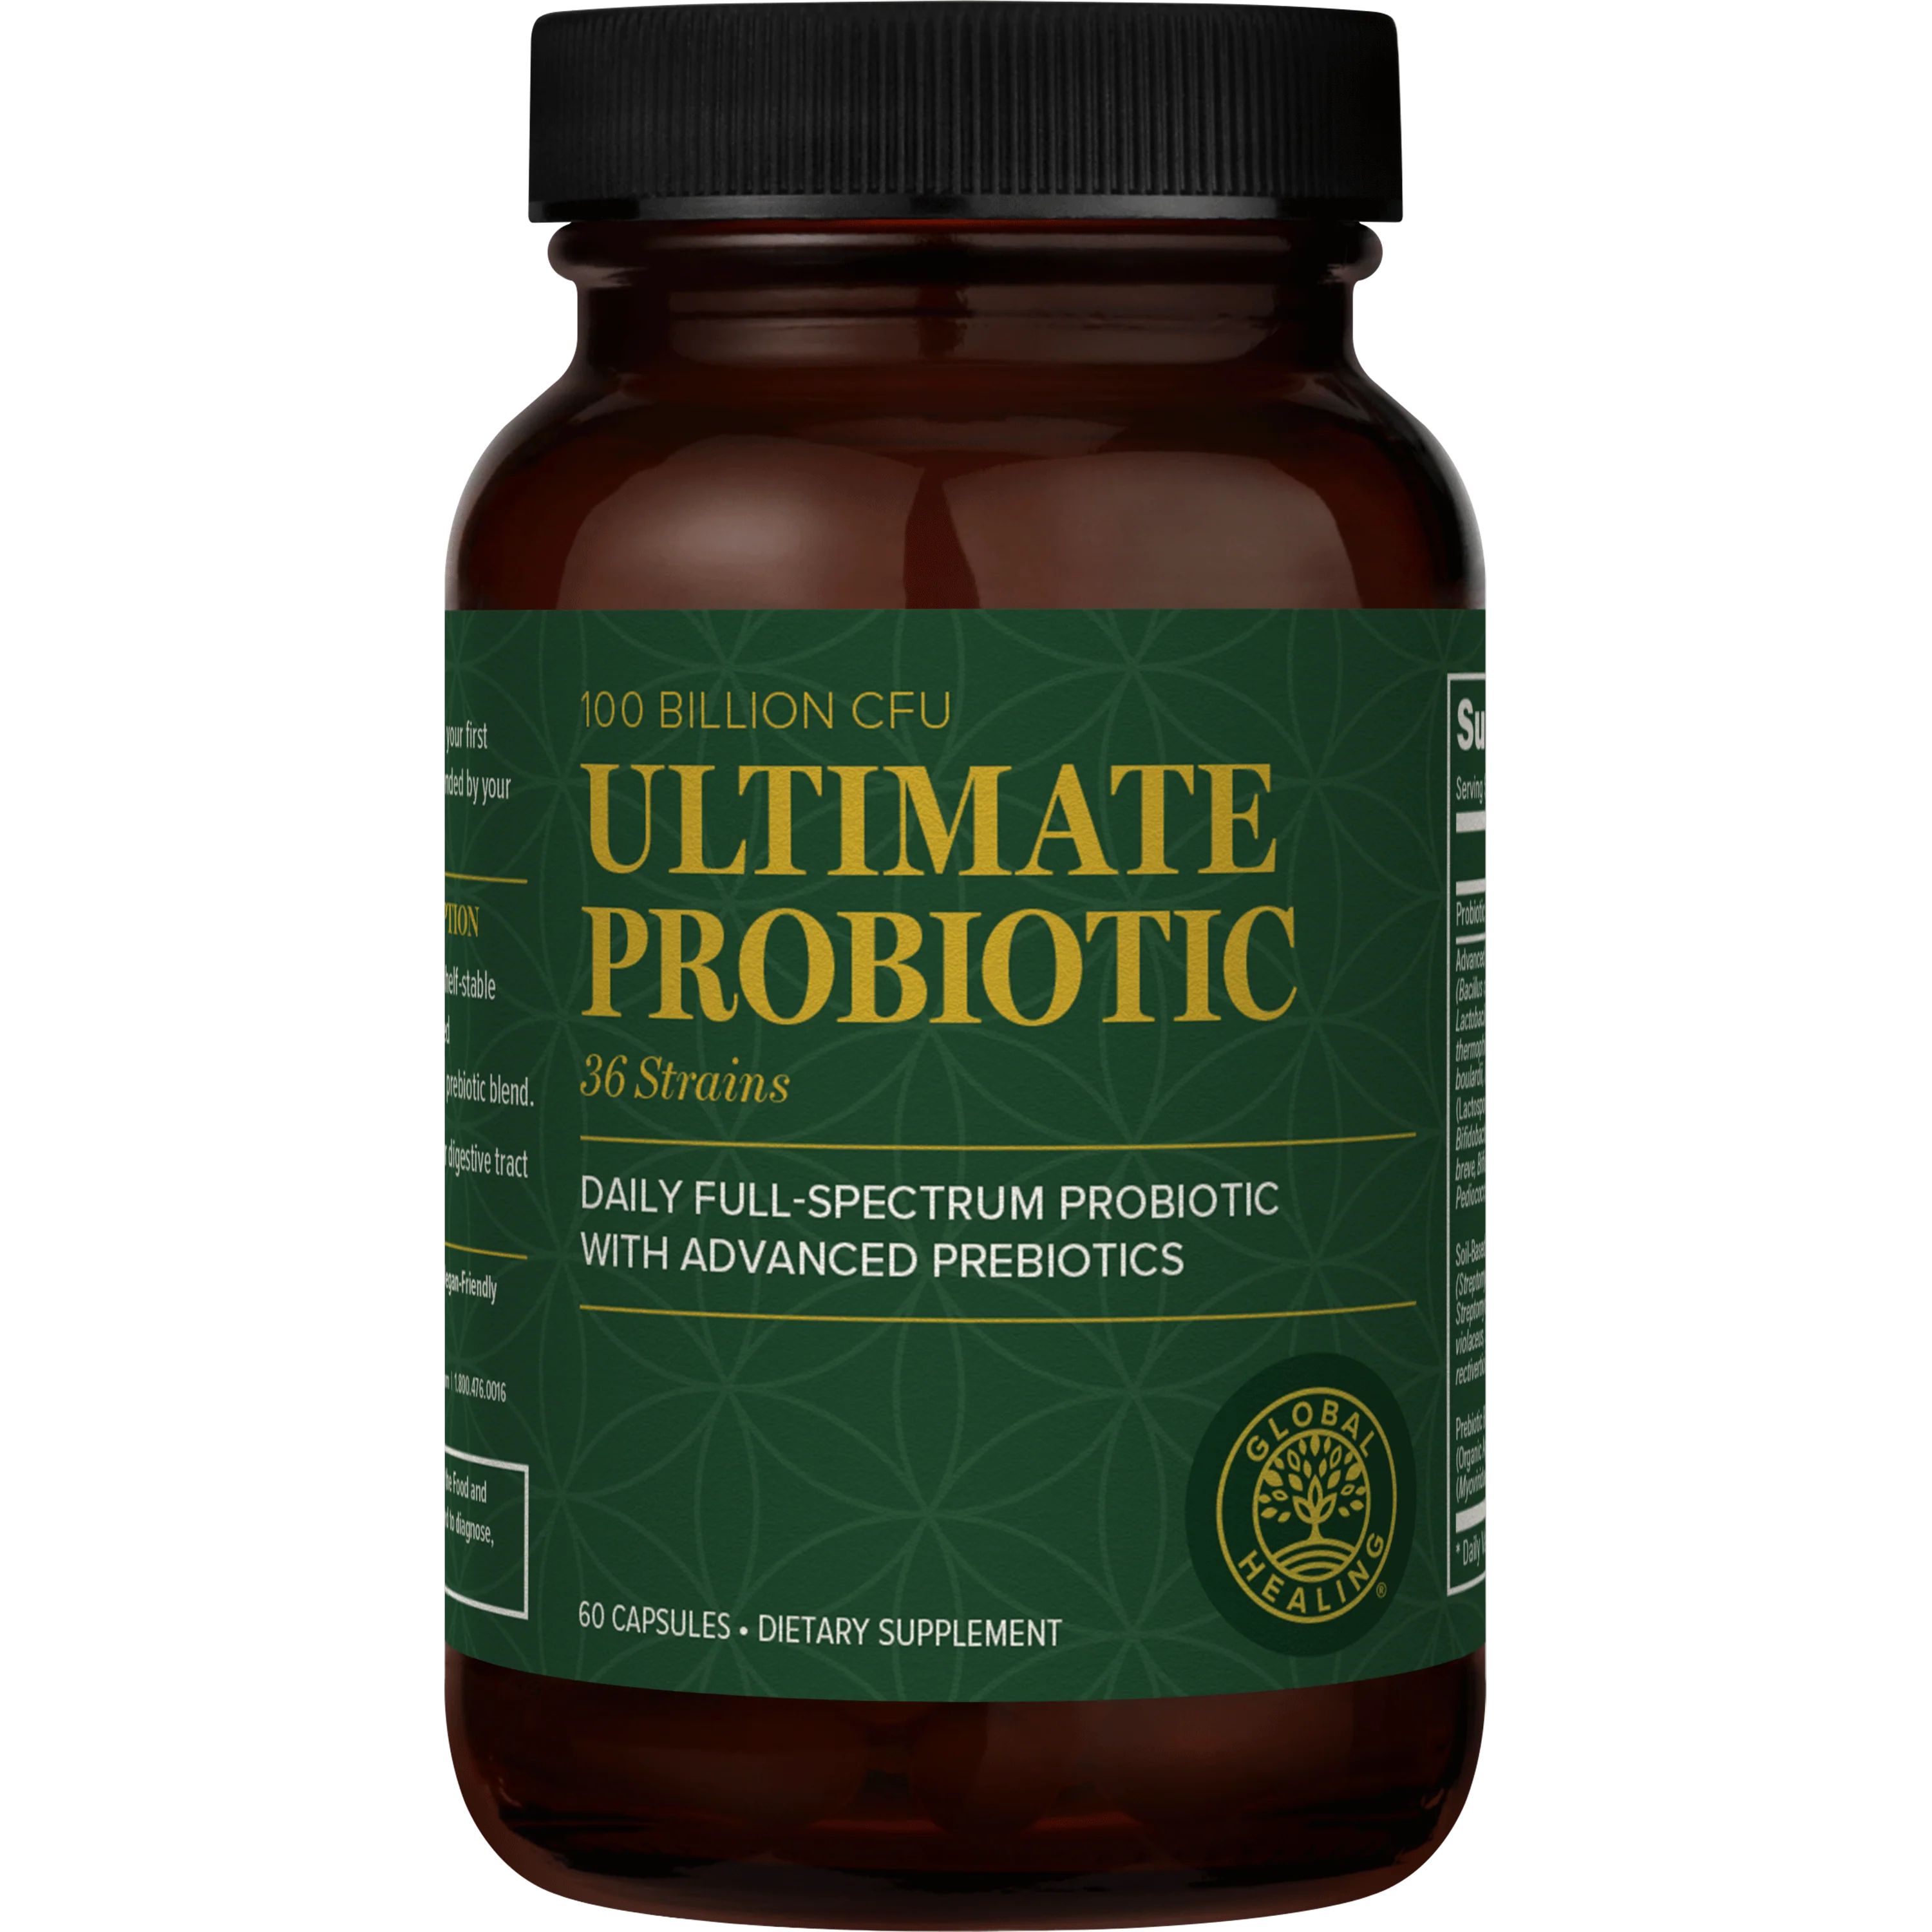 Ultimate Probiotic — Your Daily Probiotic With Advanced Prebiotics | Global Healing Center